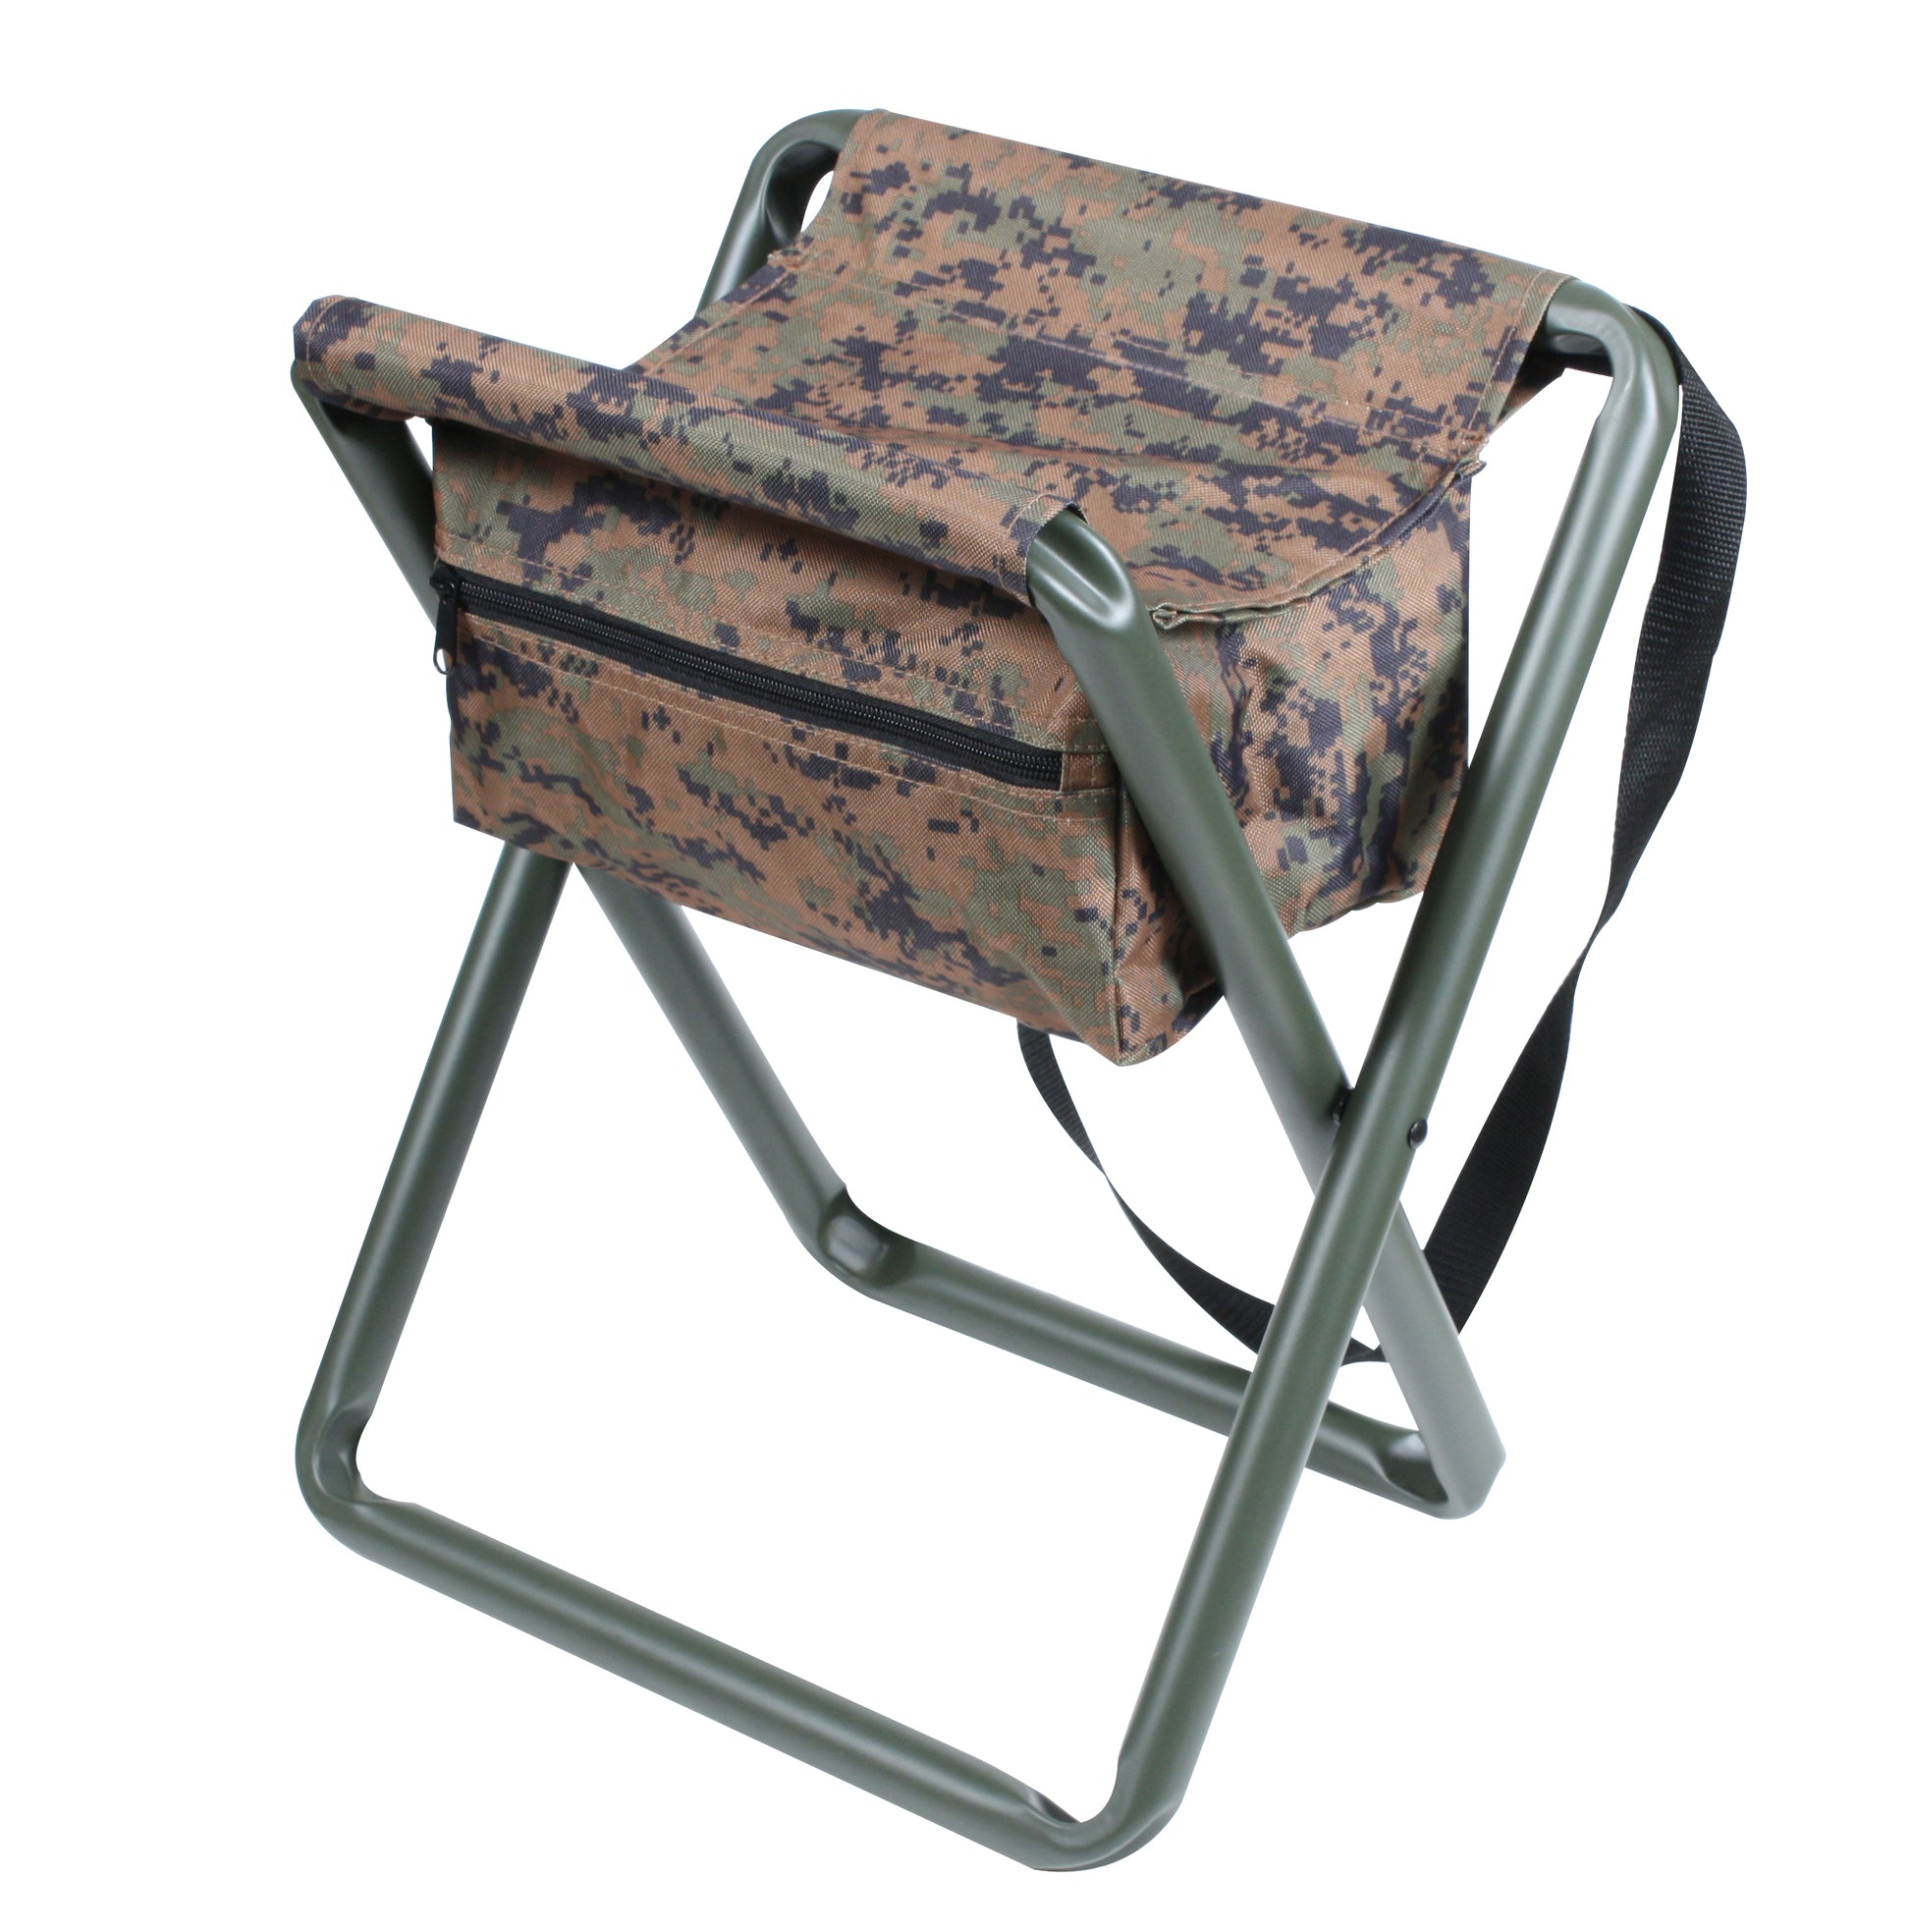 Milspec Deluxe Stool With Pouch Camp Stools & Chairs MilTac Tactical Military Outdoor Gear Australia